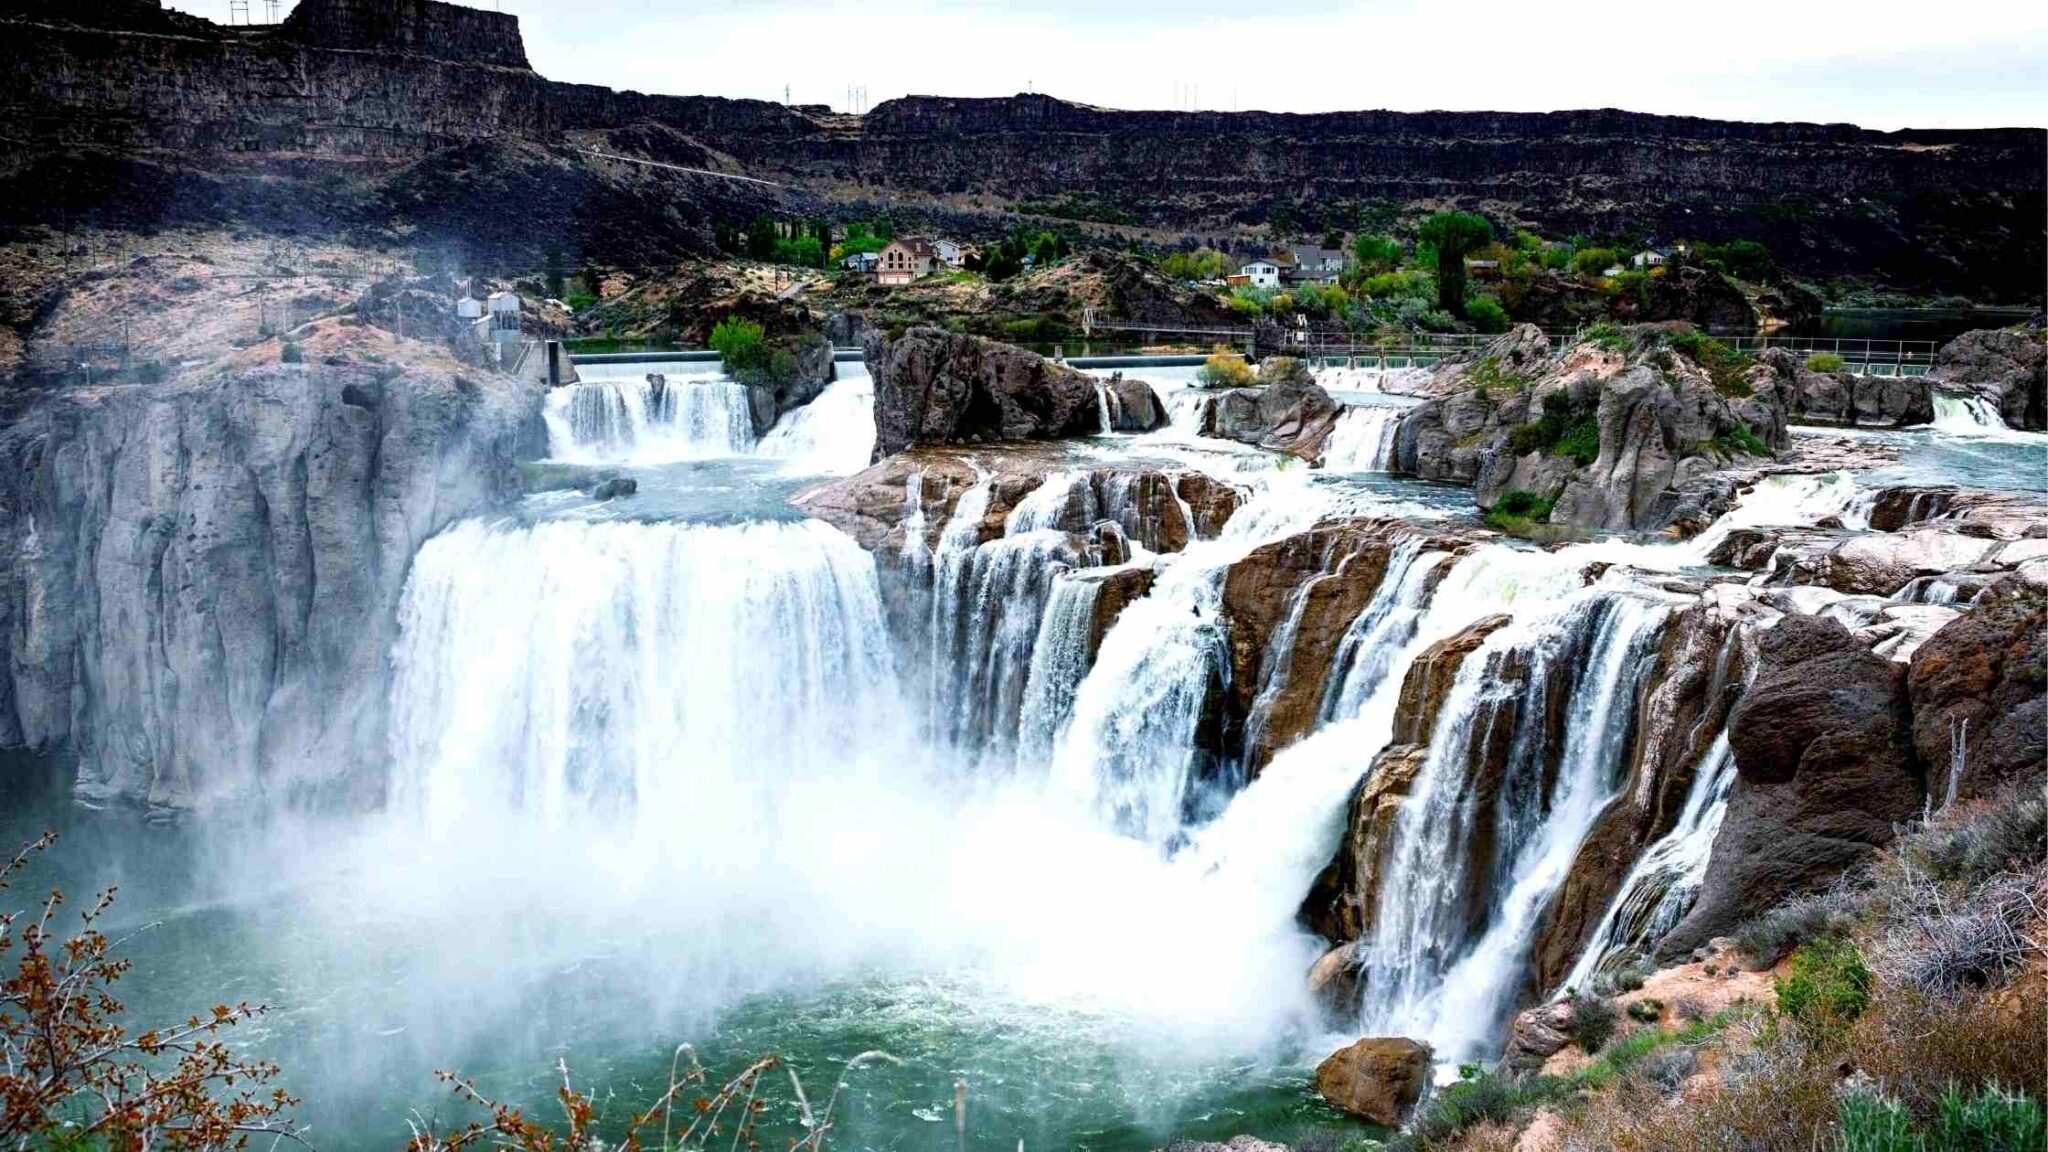 Visit Shoshone Falls - How To Plan A Trip to the Niagara of the West